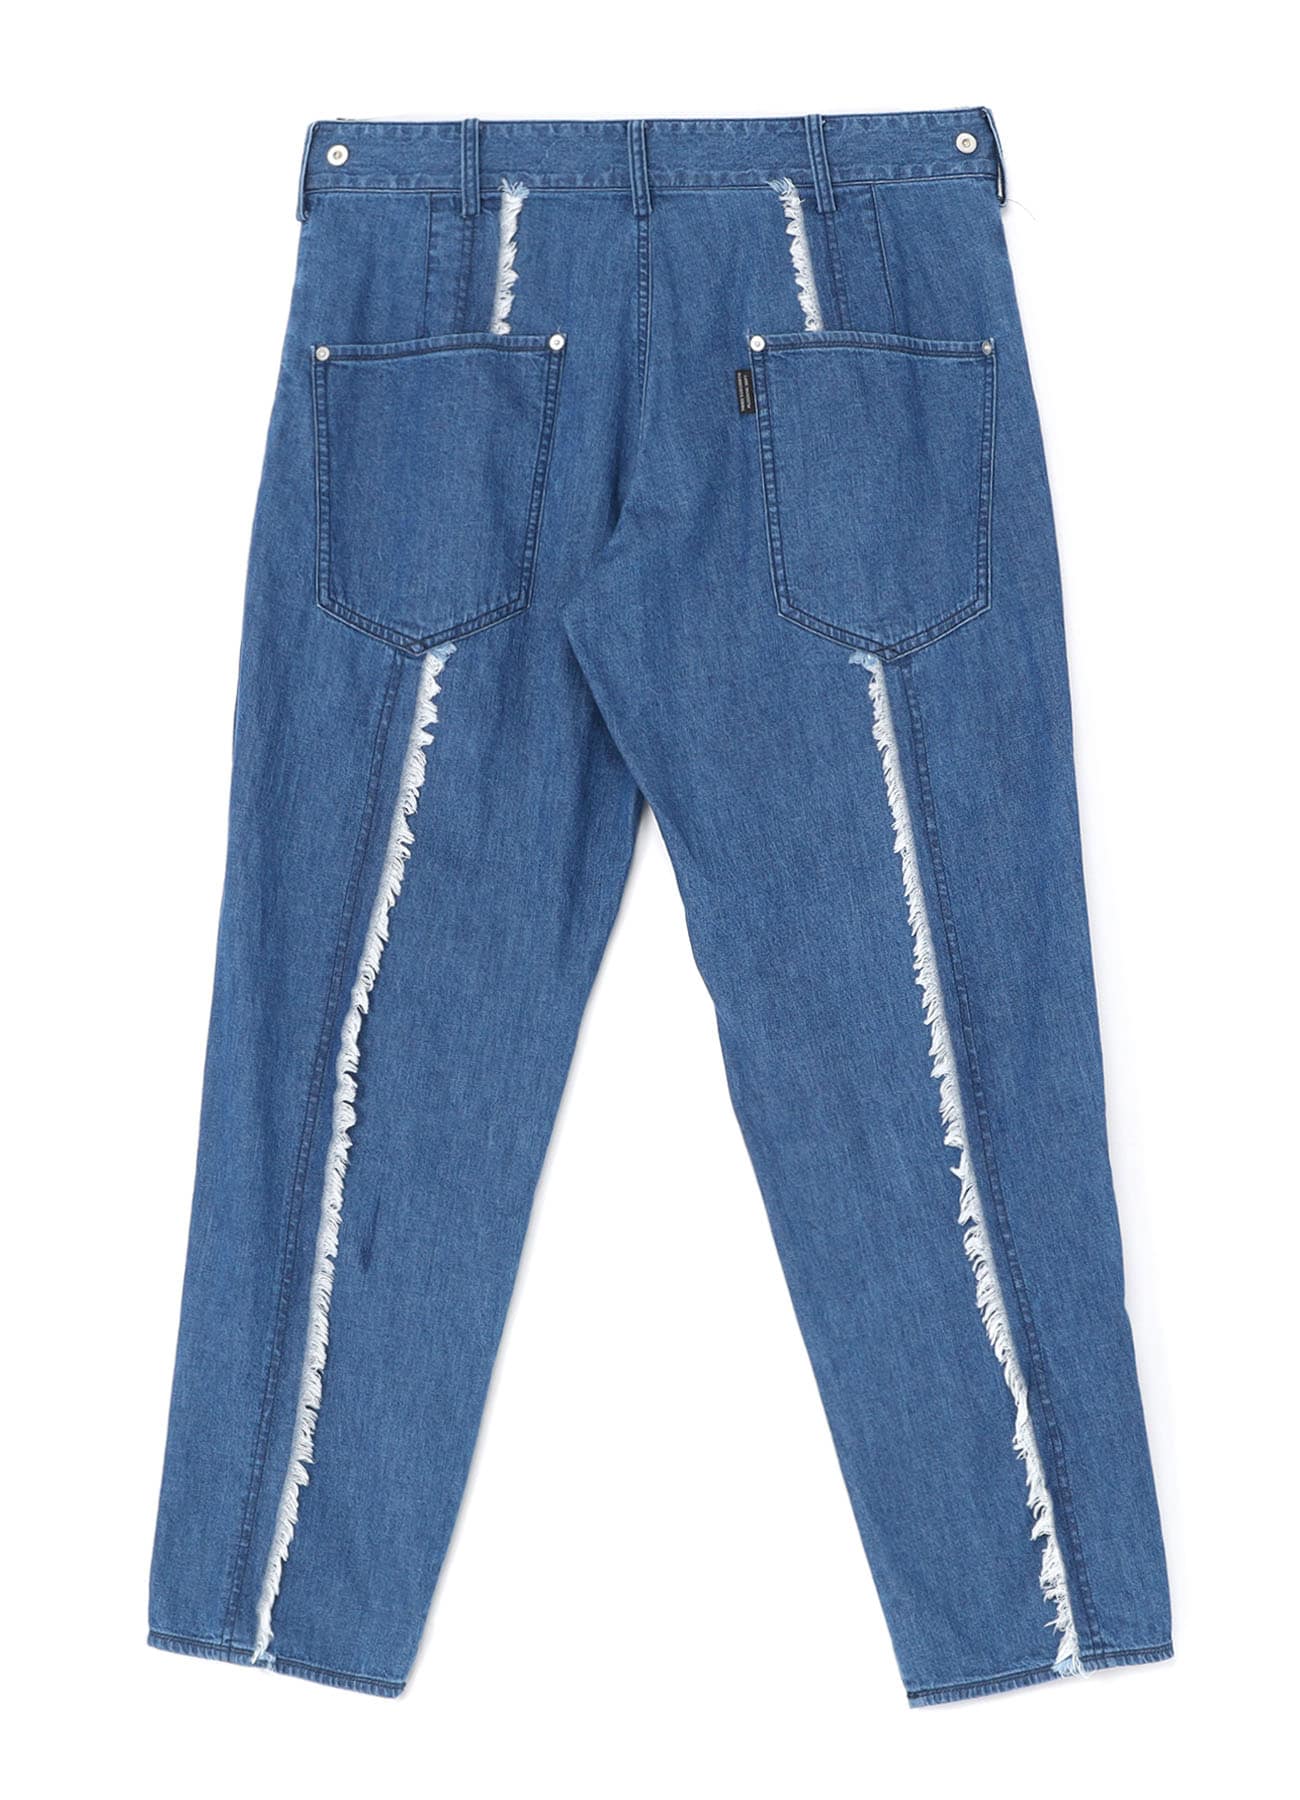 8OZ DENIM PANTS WITH RIPPED LINE DETAIL(M Light Blue): S'YTE｜THE 